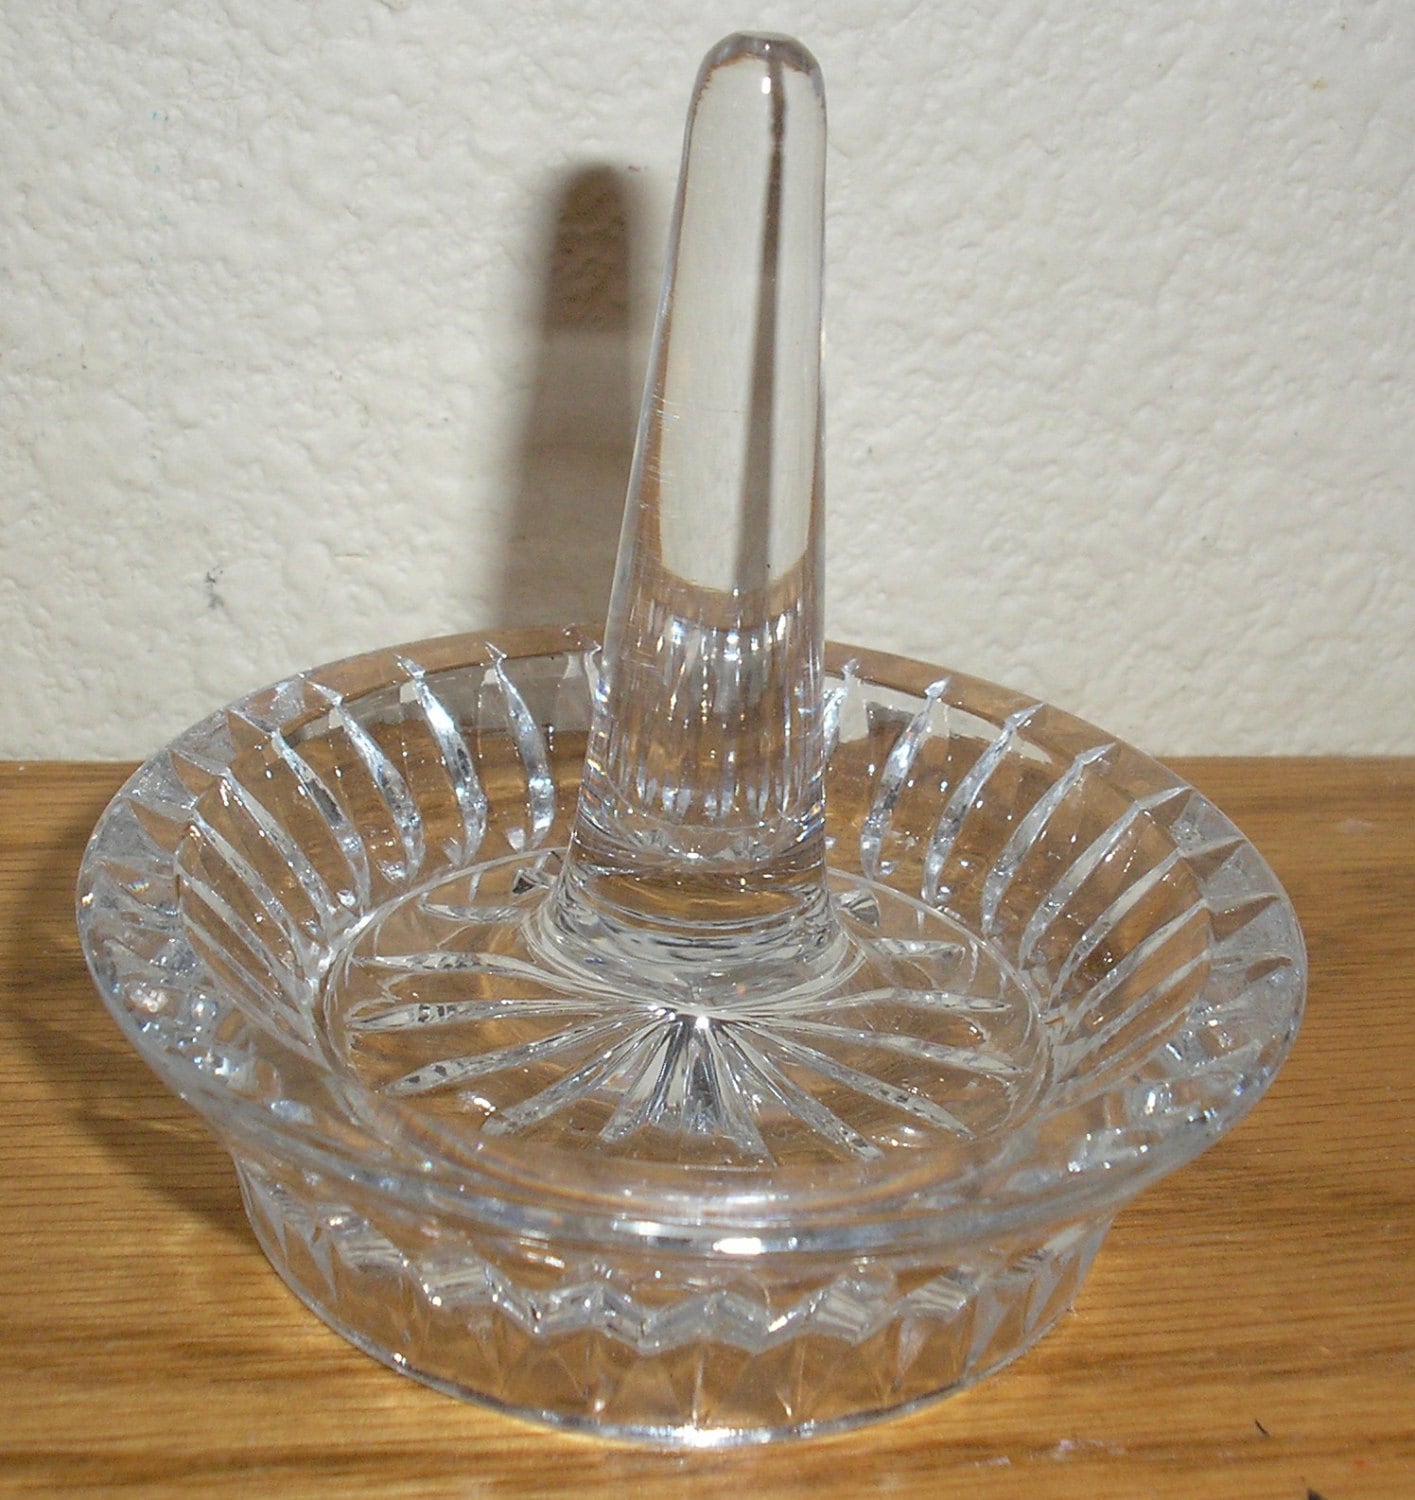 Waterford crystal round ring holder by jeaniesrosepatch6 on Etsy